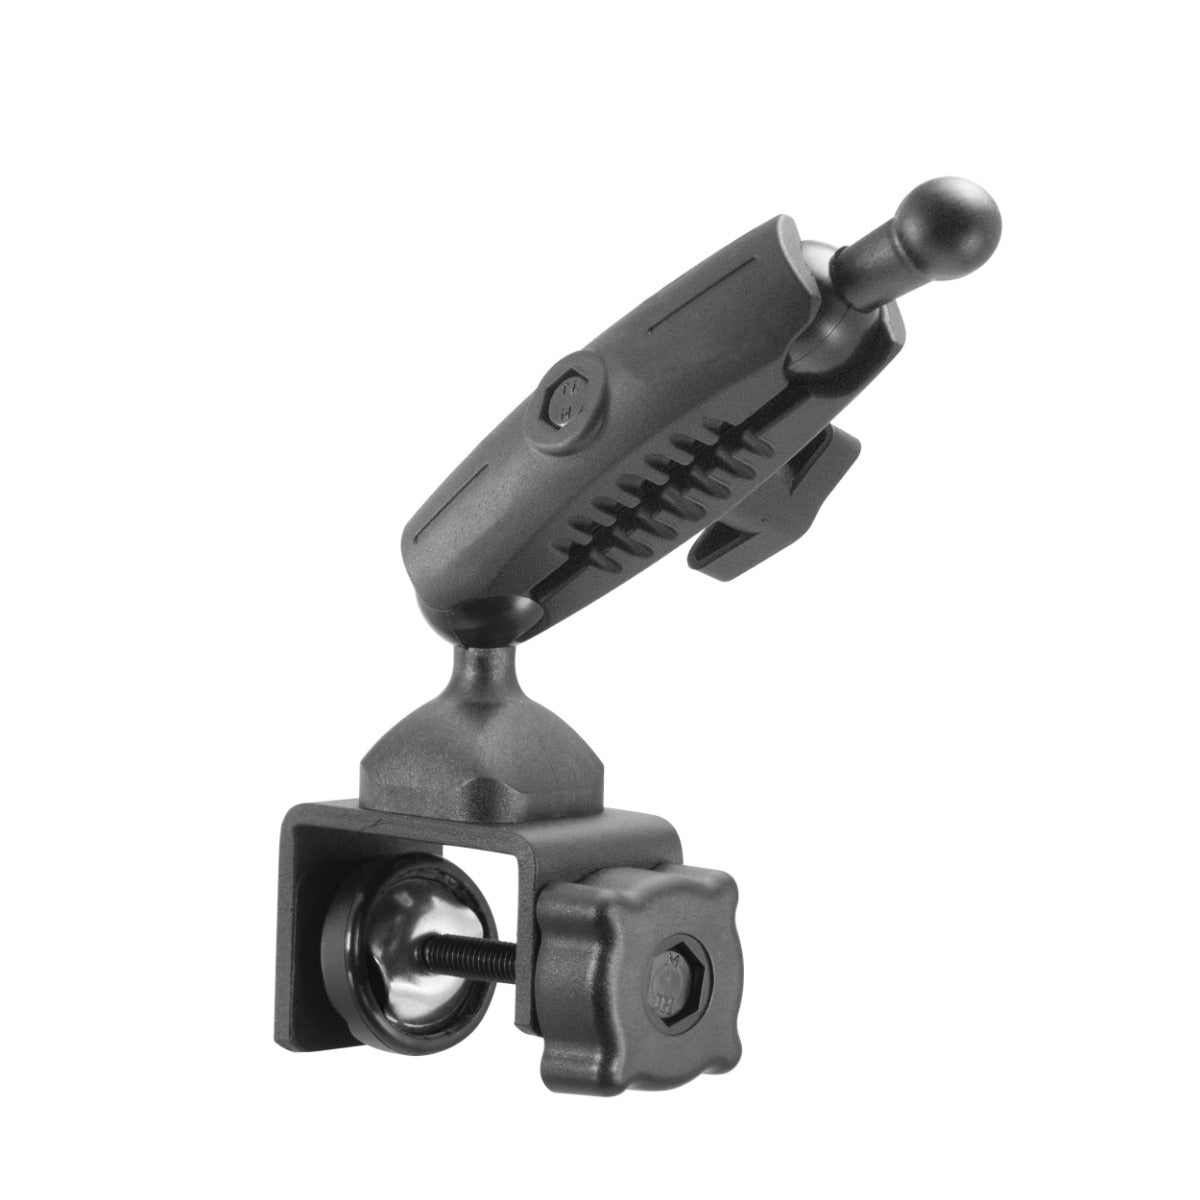 iBOLT 17mm Dual Ball Clamp Mount for Handlebars, Poles, Posts for Garmin GPS and iBOLT Phone Holders